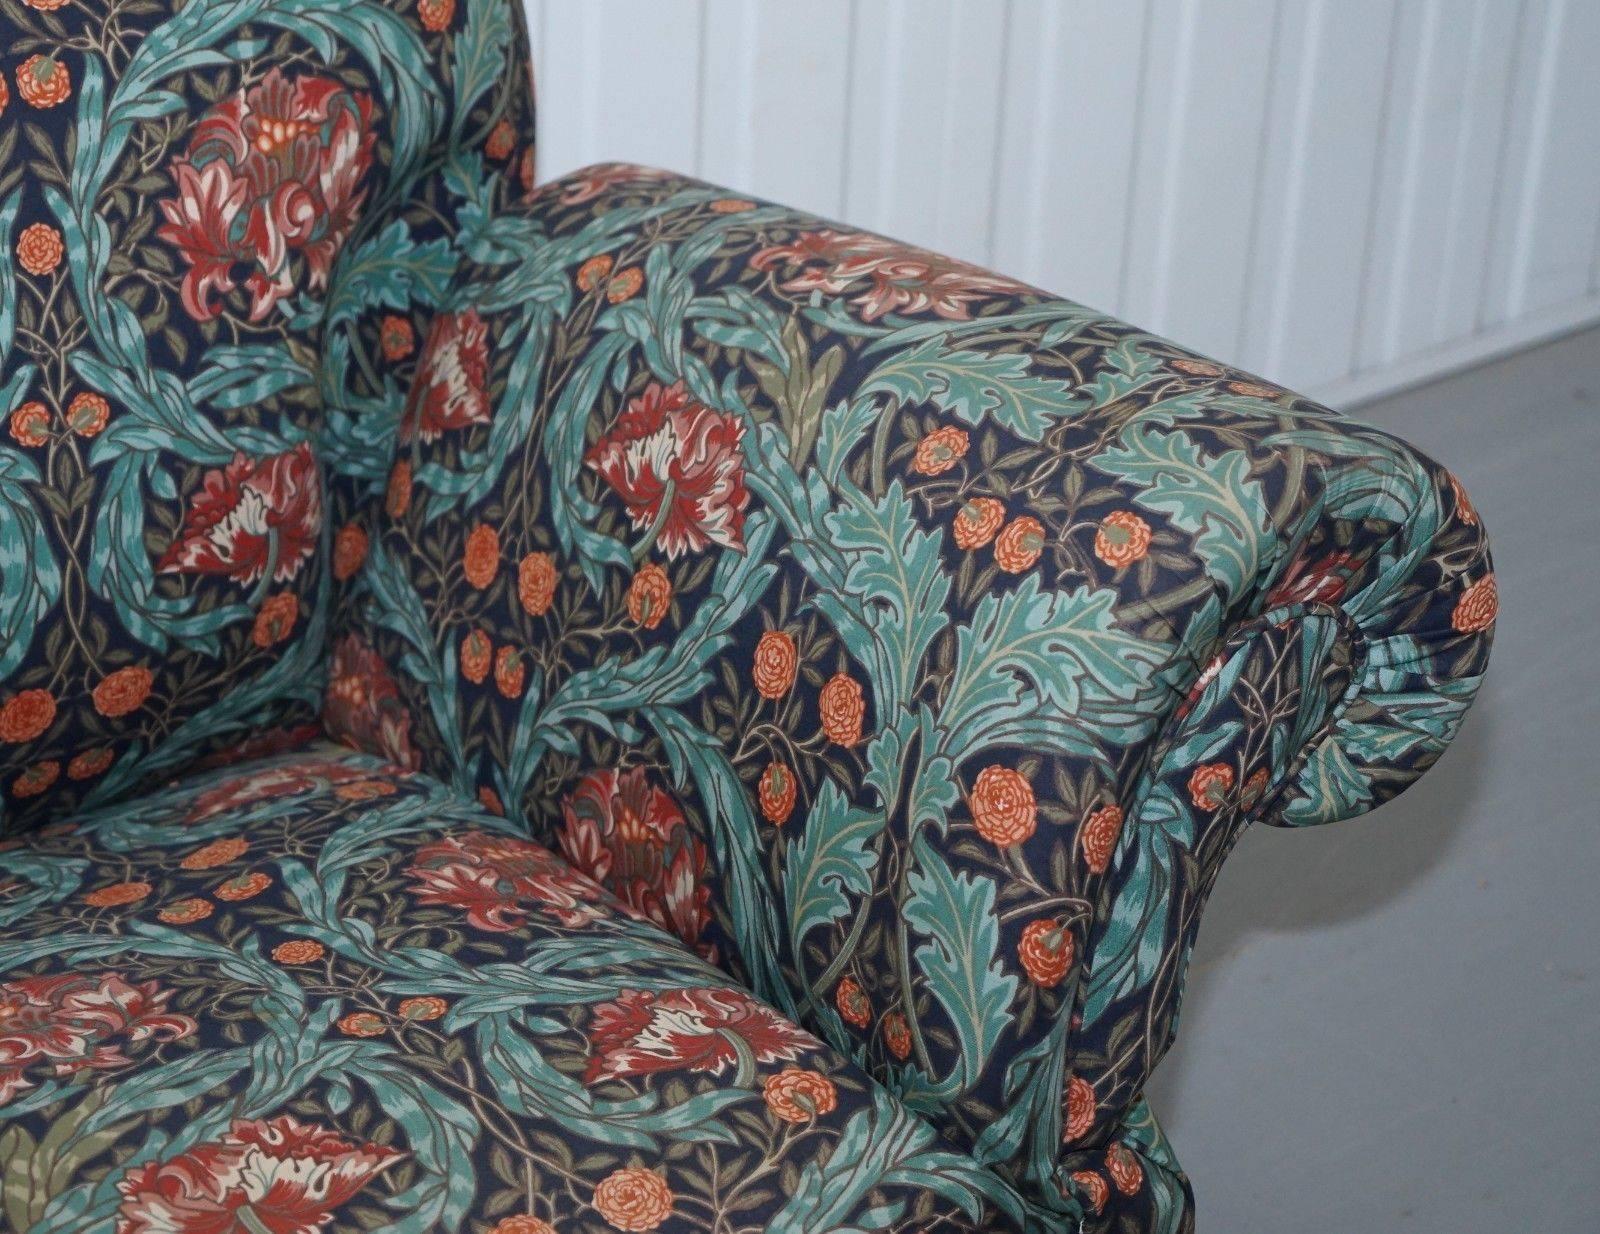 Hand-Crafted Victorian Drop Arm Club Sofa in William Morris Upholstery Fabric Part of a Suite